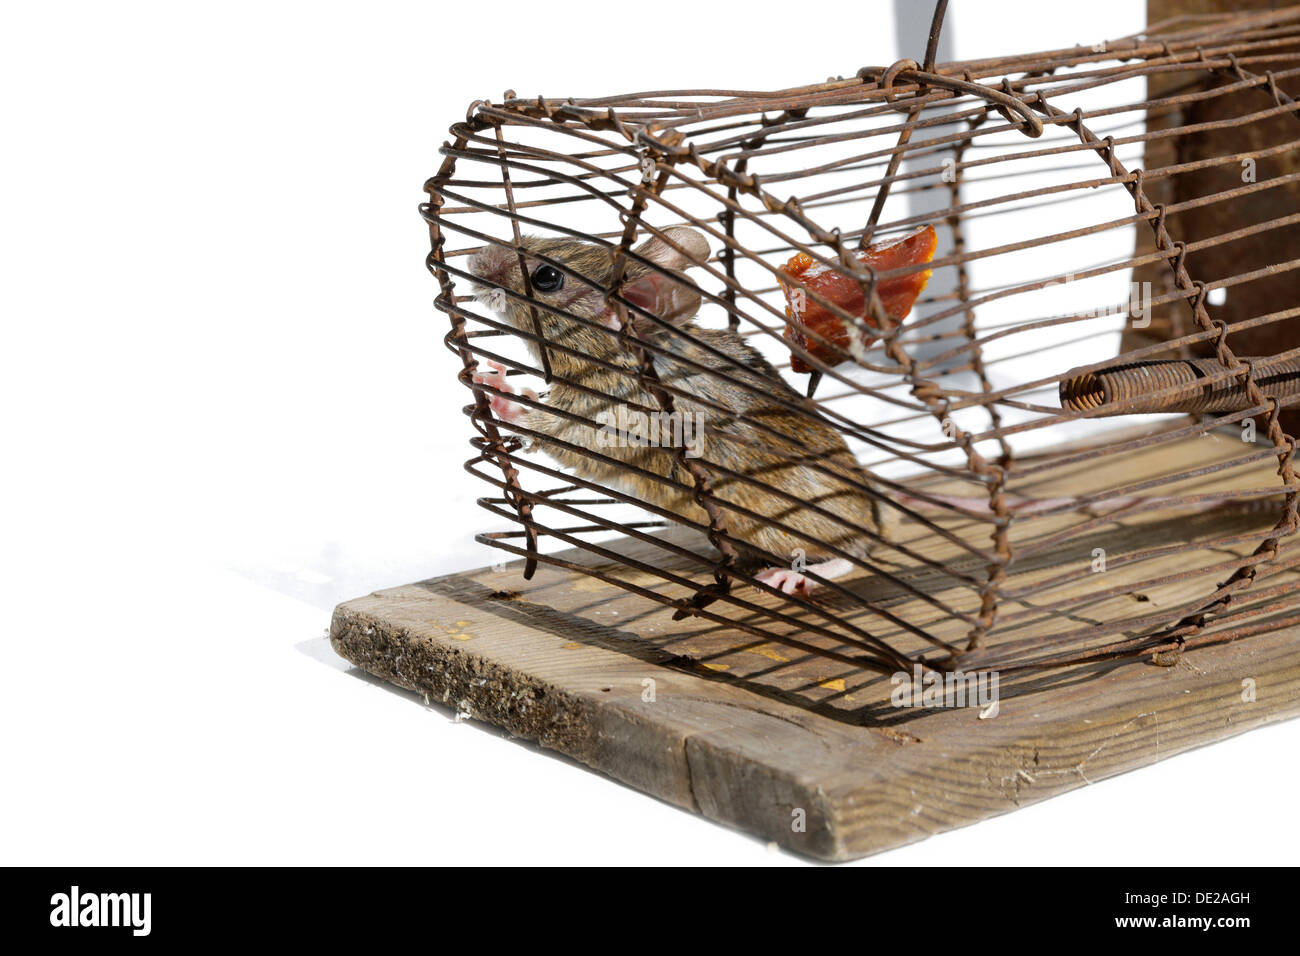 House mouse (Mus musculus), in a live-trap feeding on bait Stock Photo